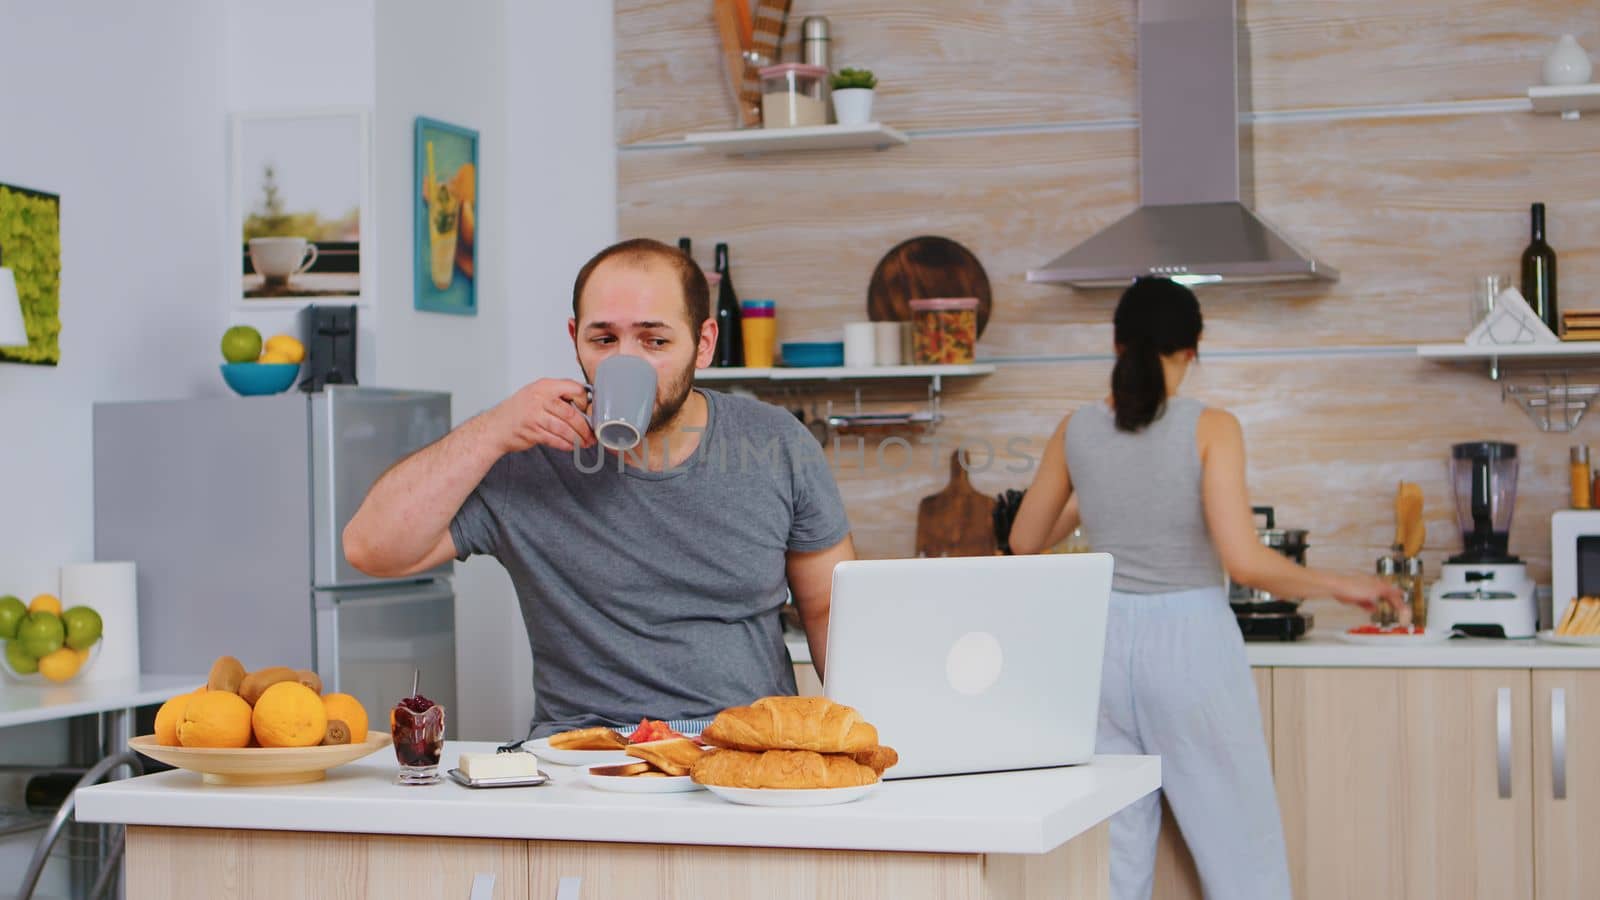 Entrepreneur working from home while eating breakfast in kitchen, wearing pajamas enjoying roasted bread with butter. Freelancer working online via internet using modern digital technology